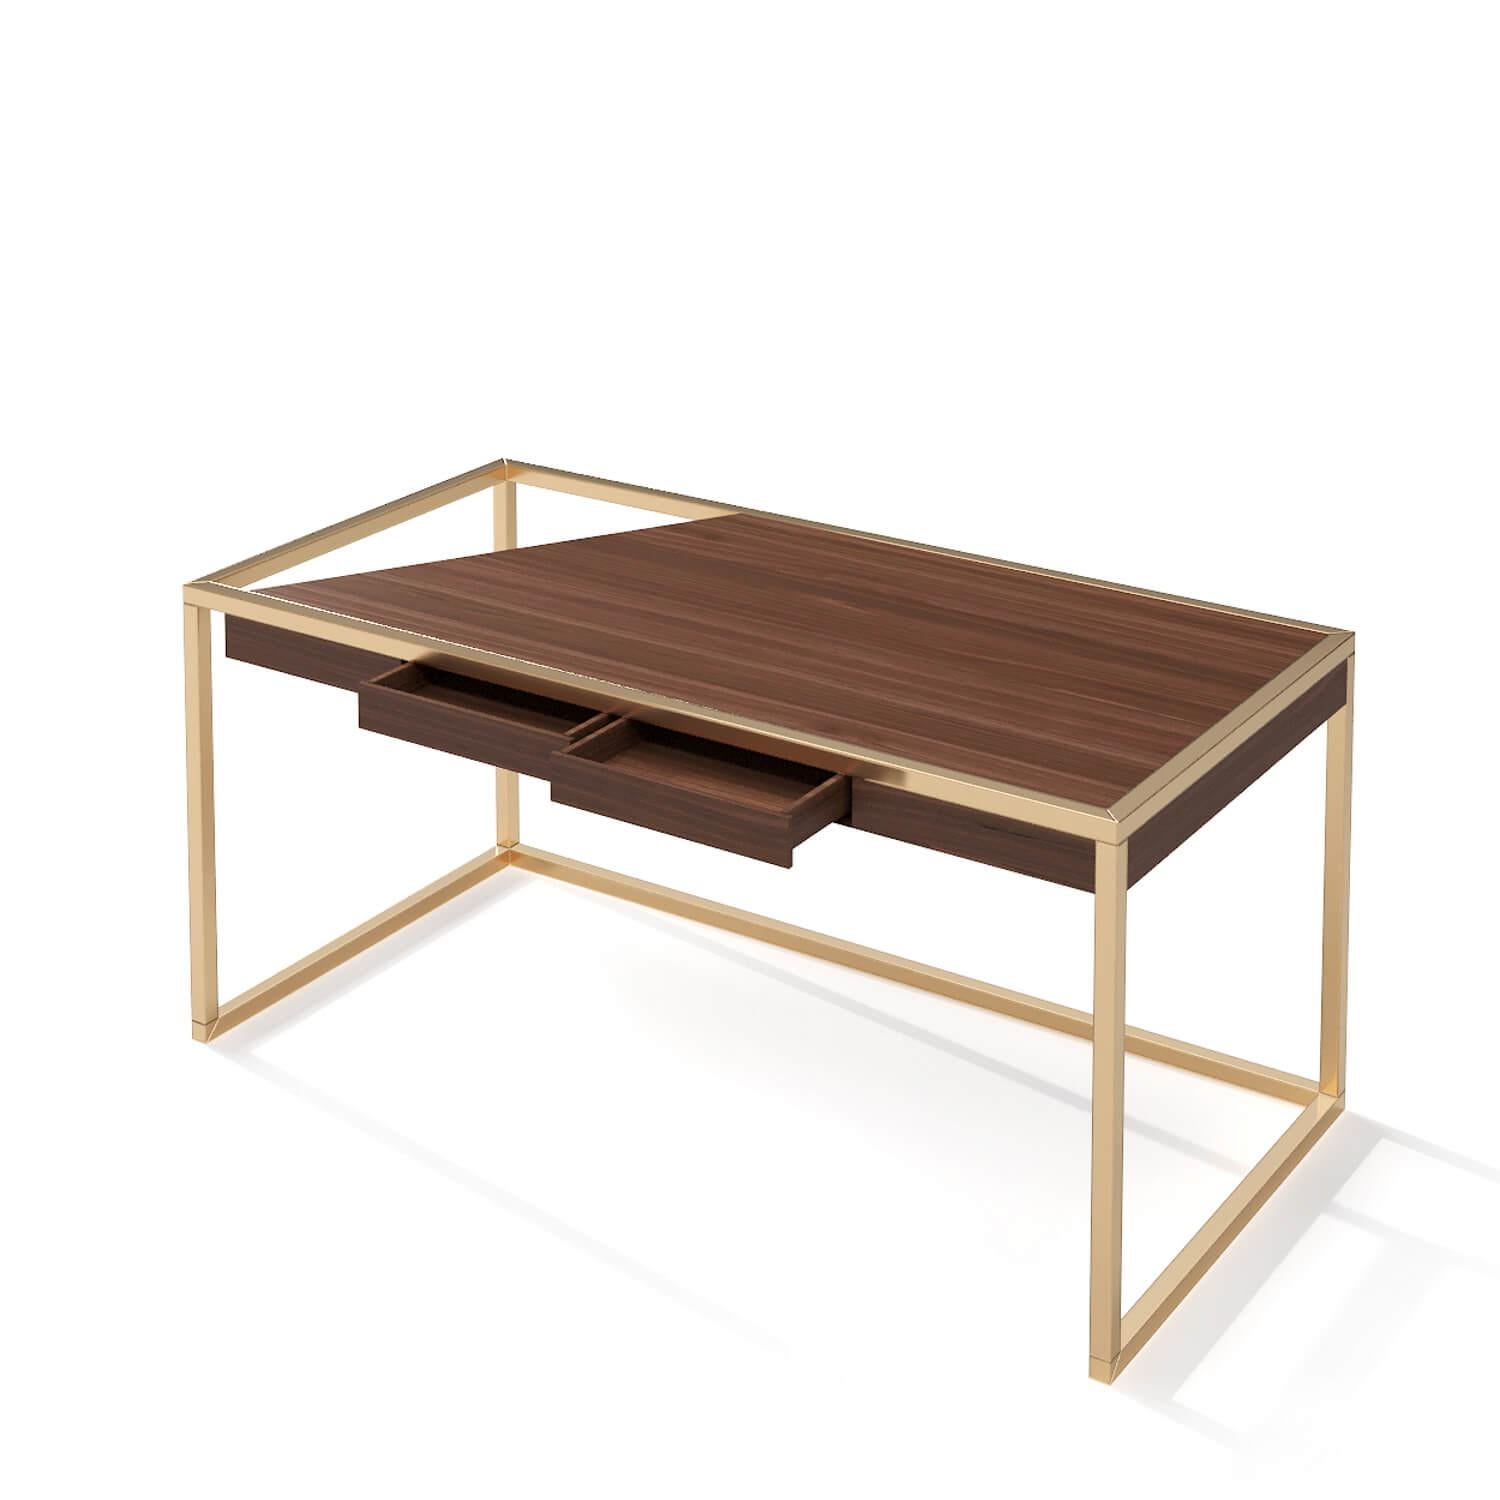 Modern Minimalist Home Office Writing Desk in Walnut Wood and Brushed Brass In New Condition For Sale In Vila Nova Famalicão, PT